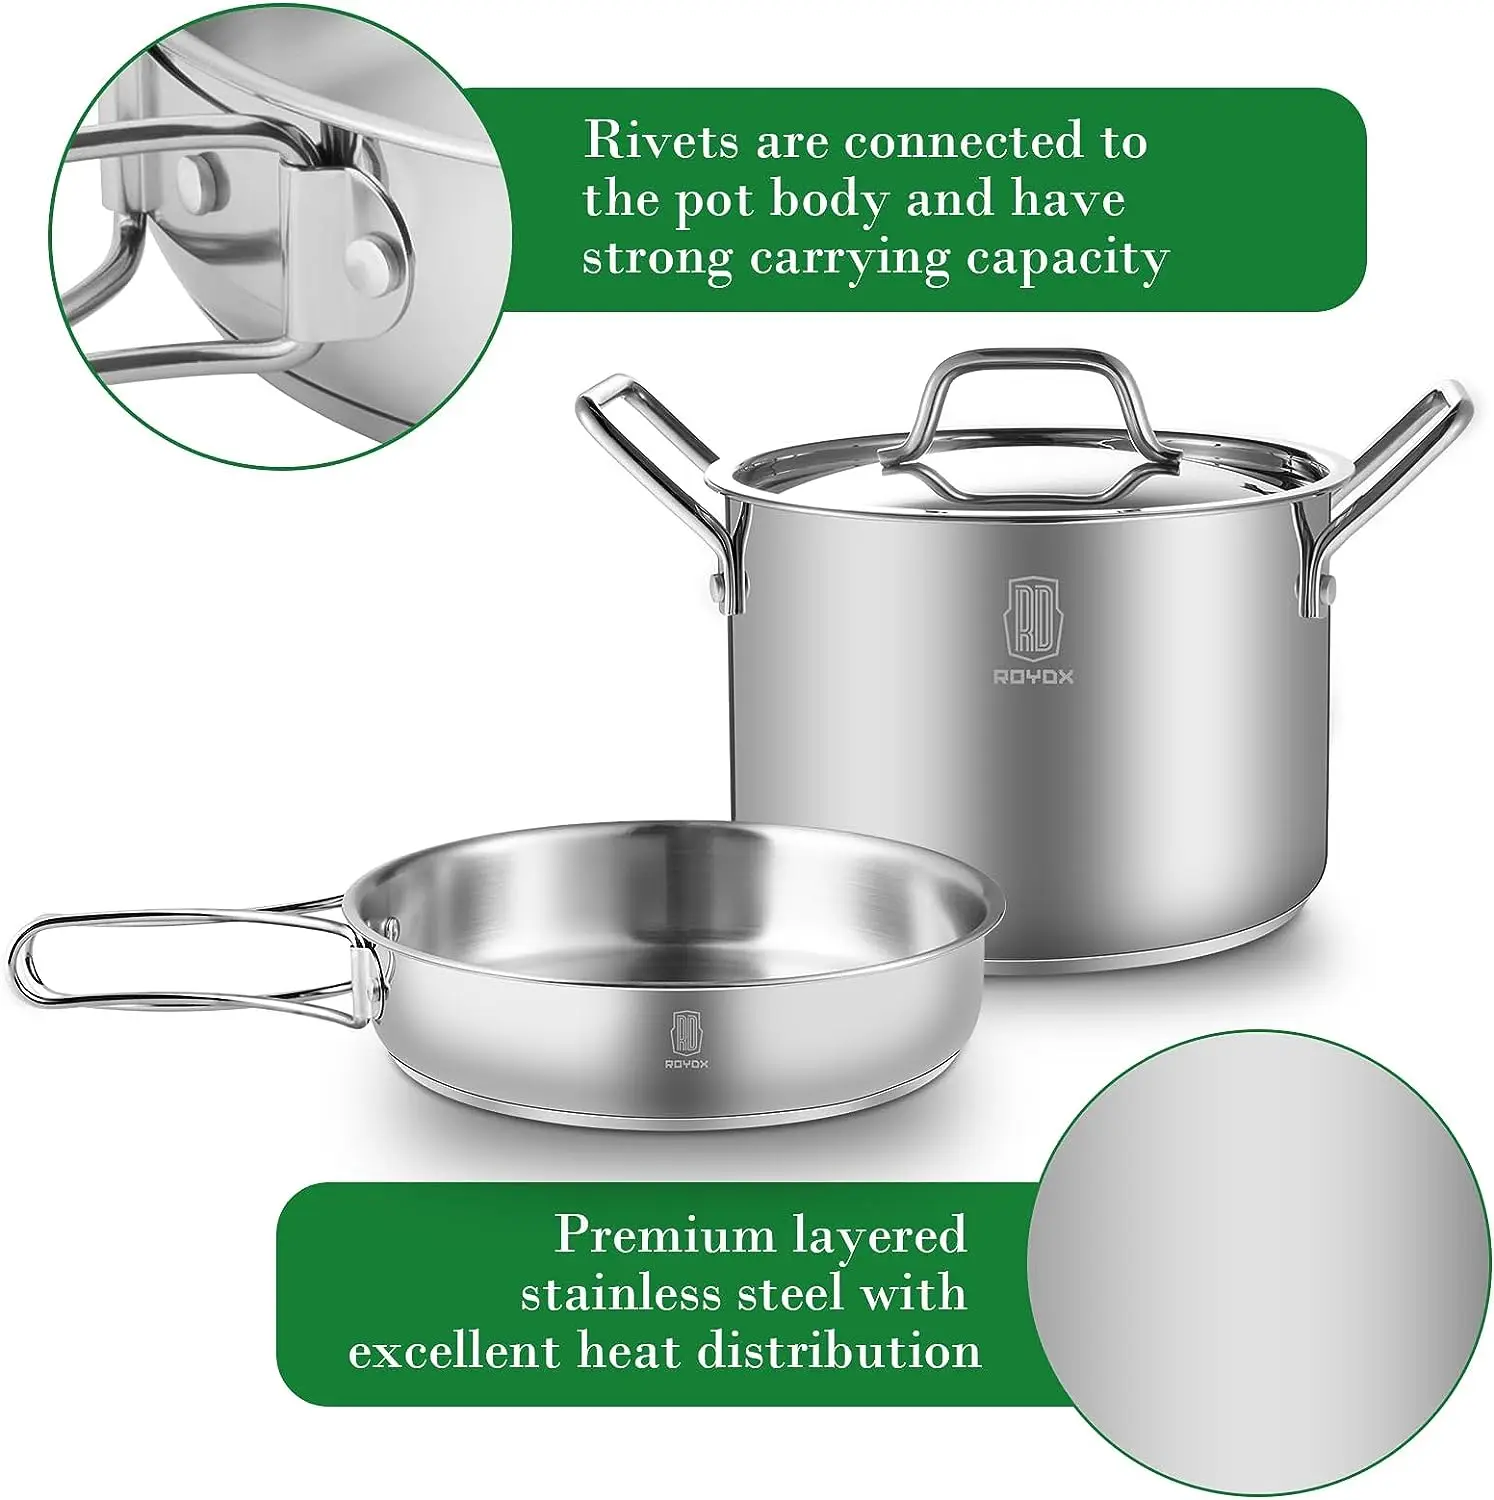 Camping Cooking Set-27 Pcs Stainless Steel Pots & Pans Open Fire